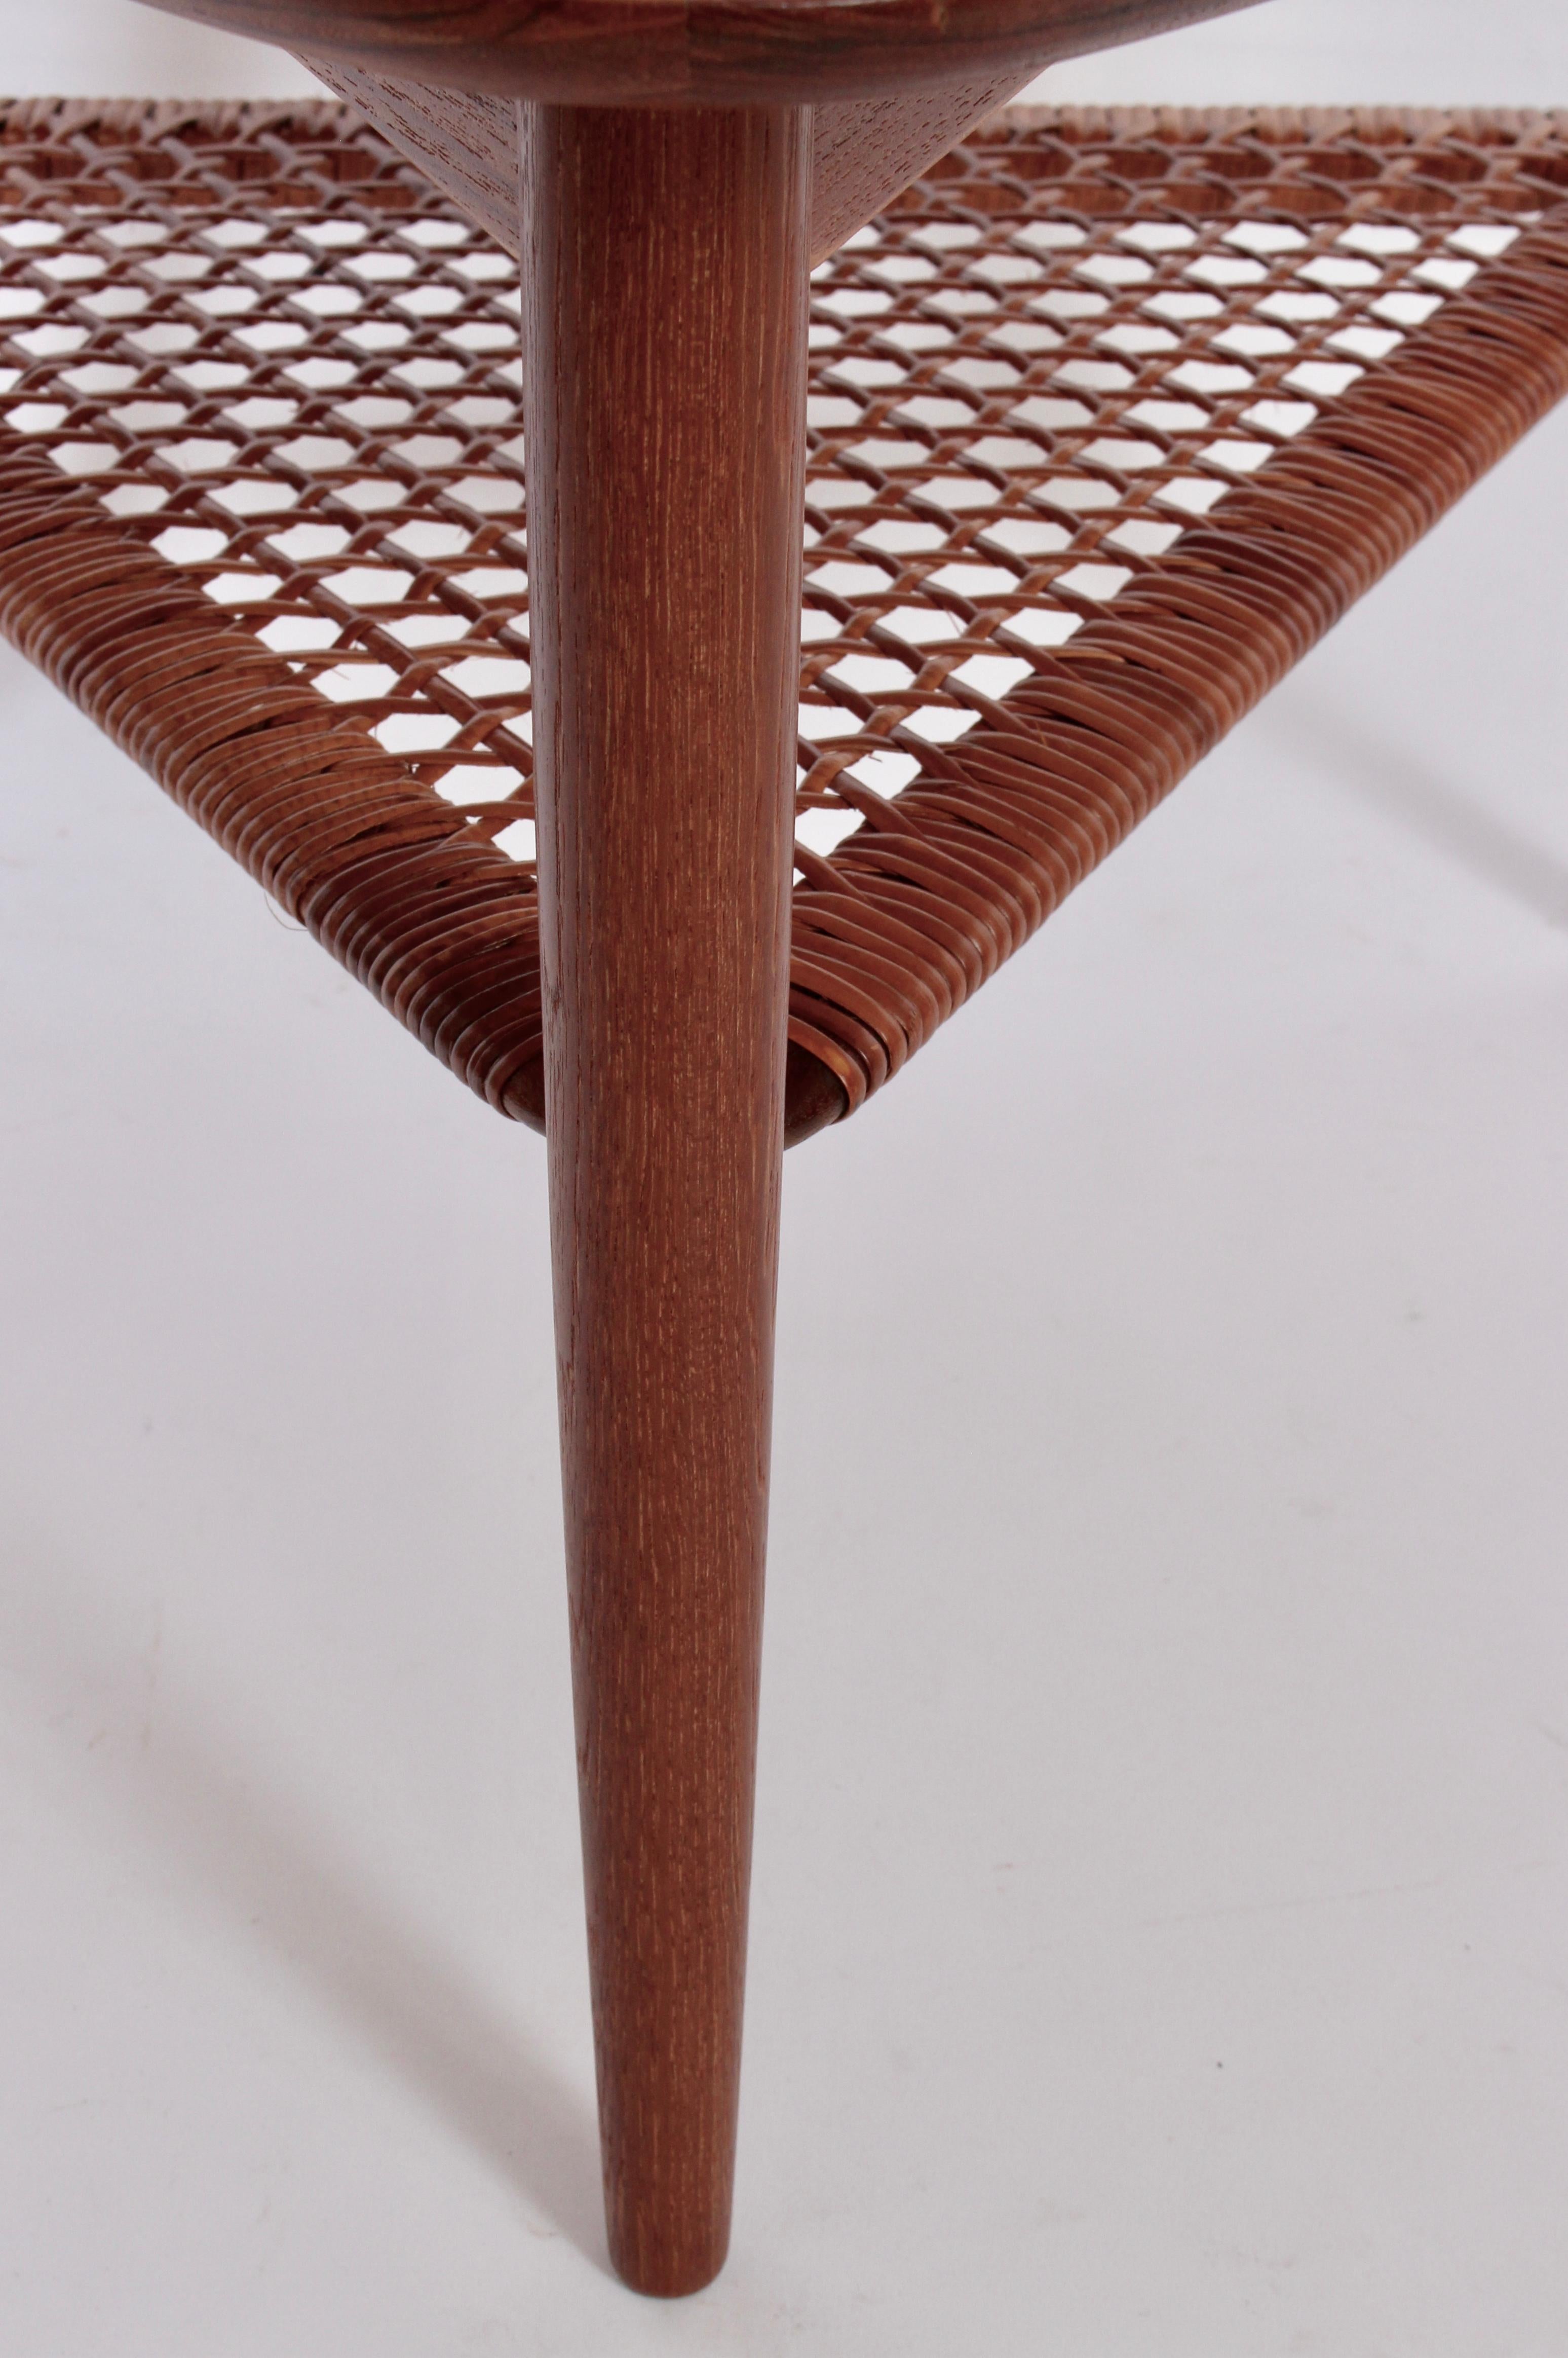 Poul Jensen for Selig Teak Tripod Table with Woven Cane Shelf, 1960's For Sale 2